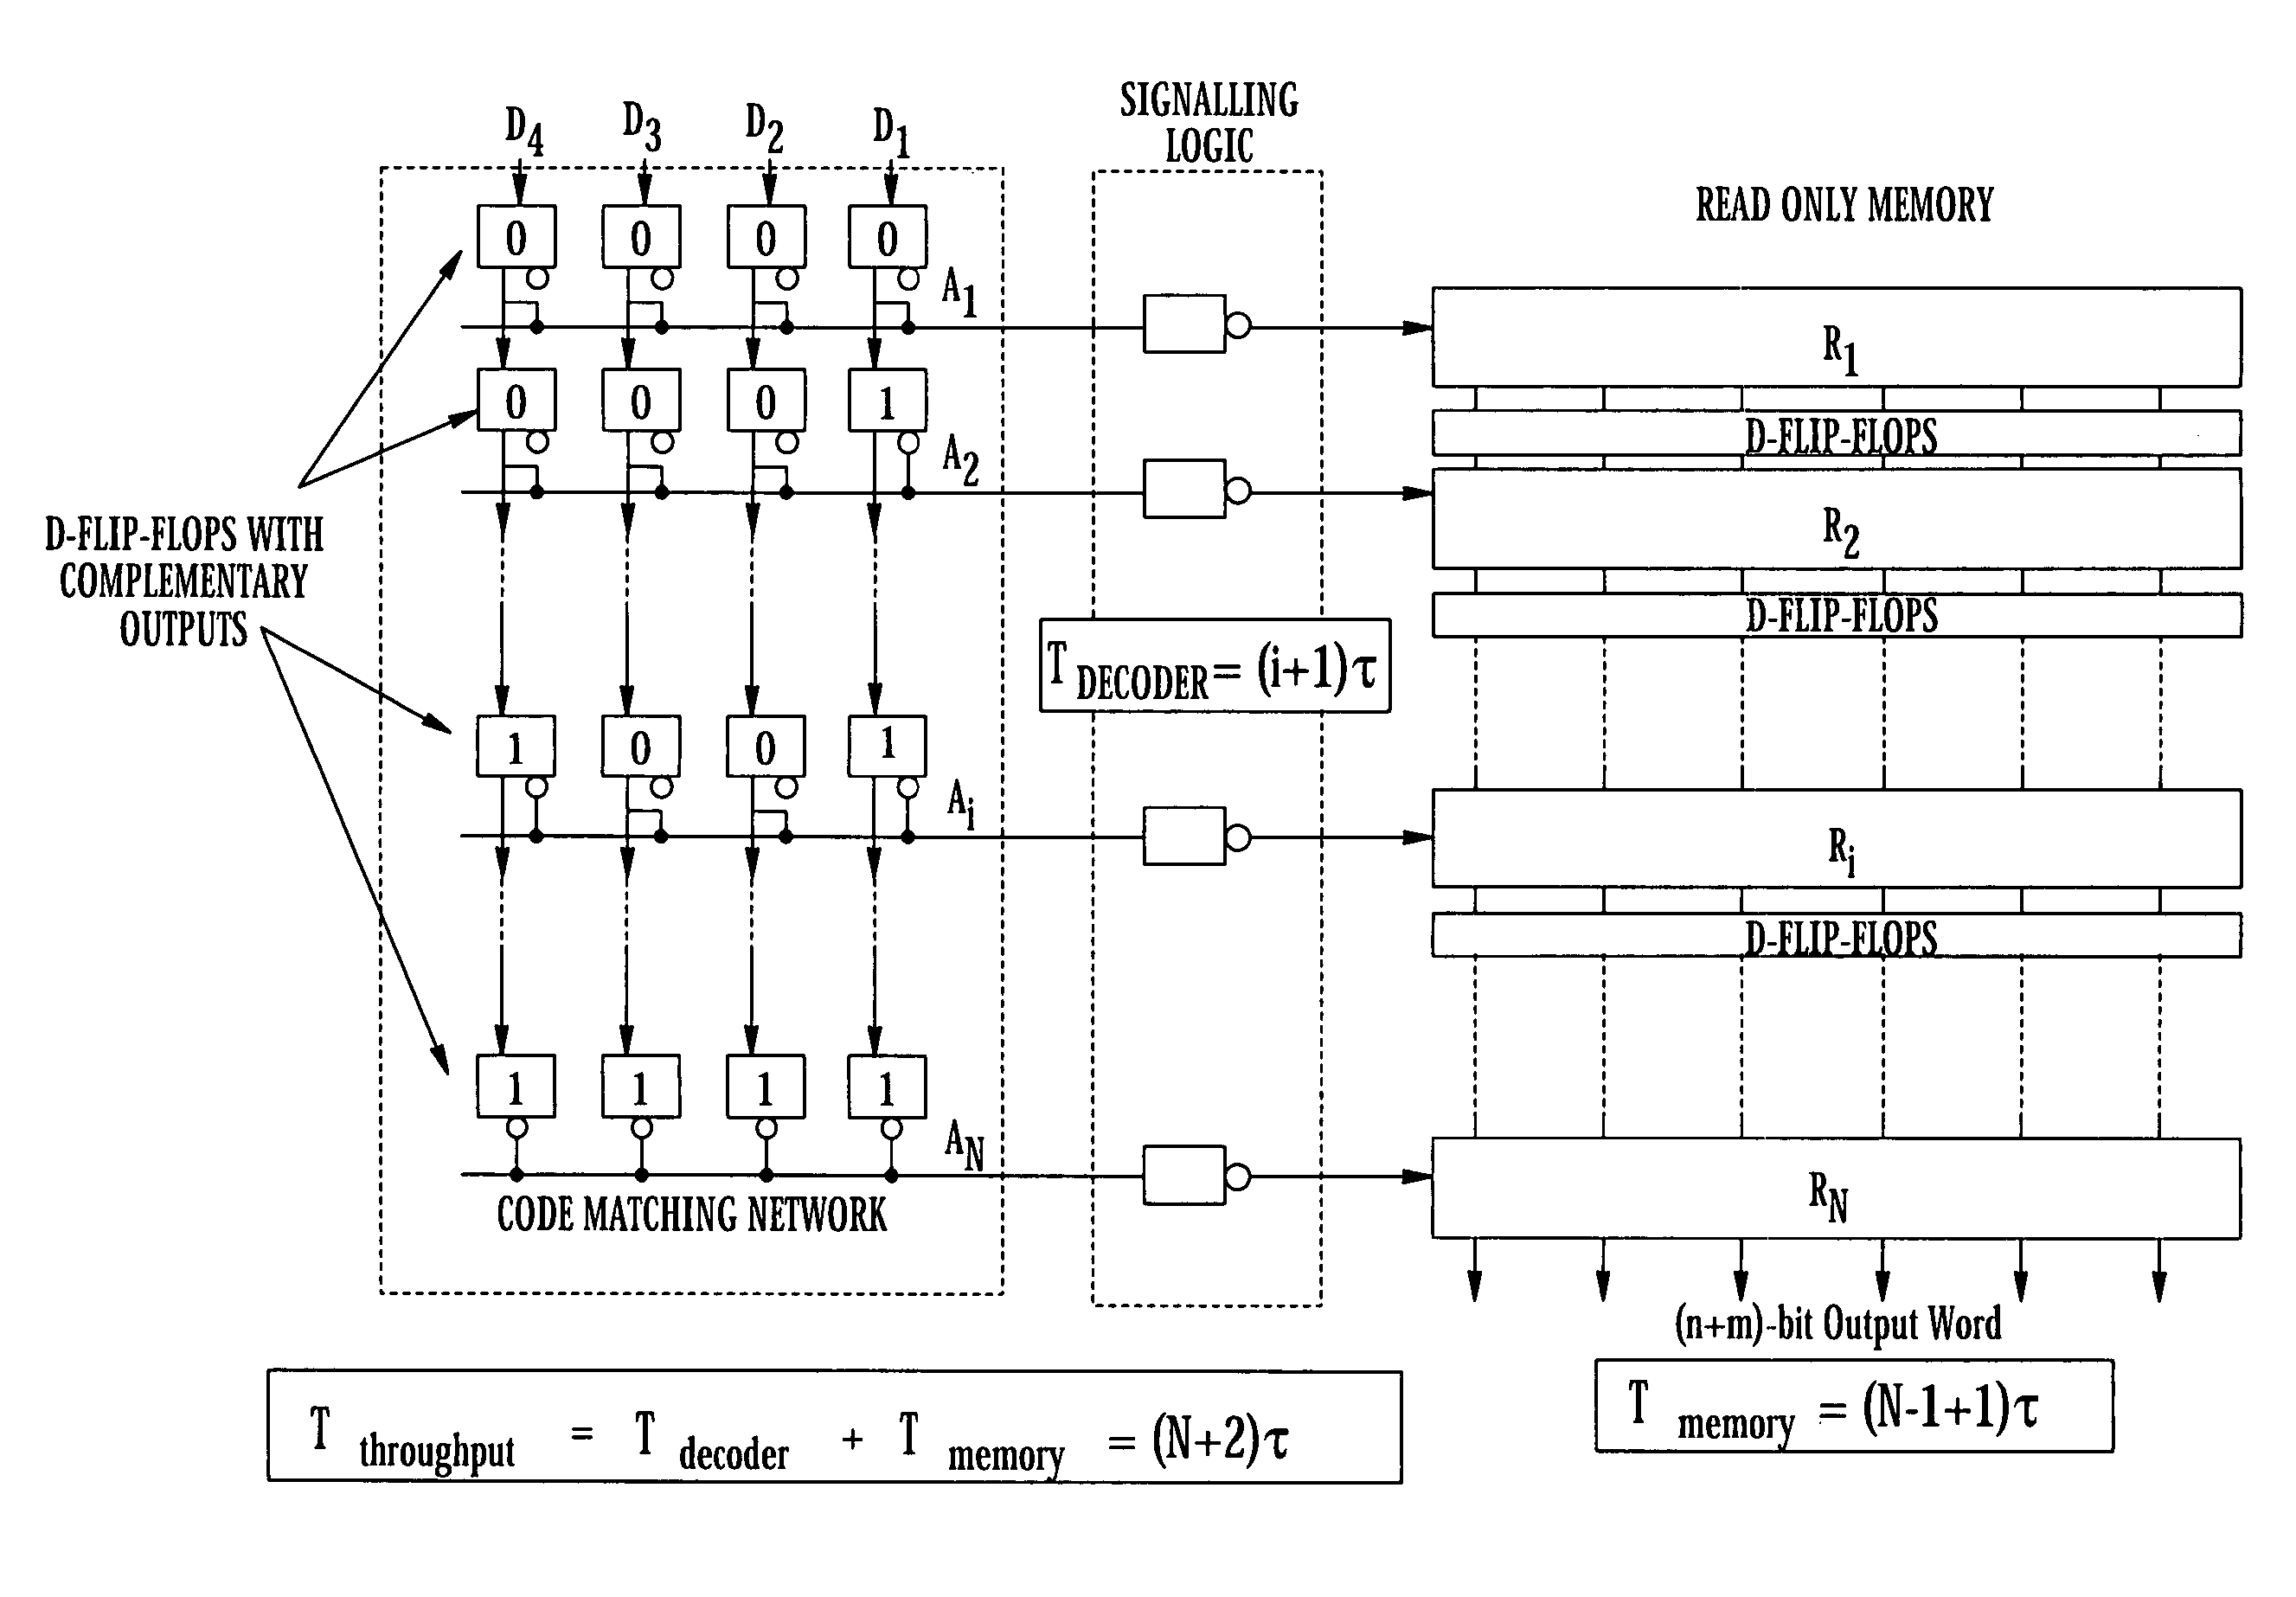 Superconducting circuit for high-speed lookup table